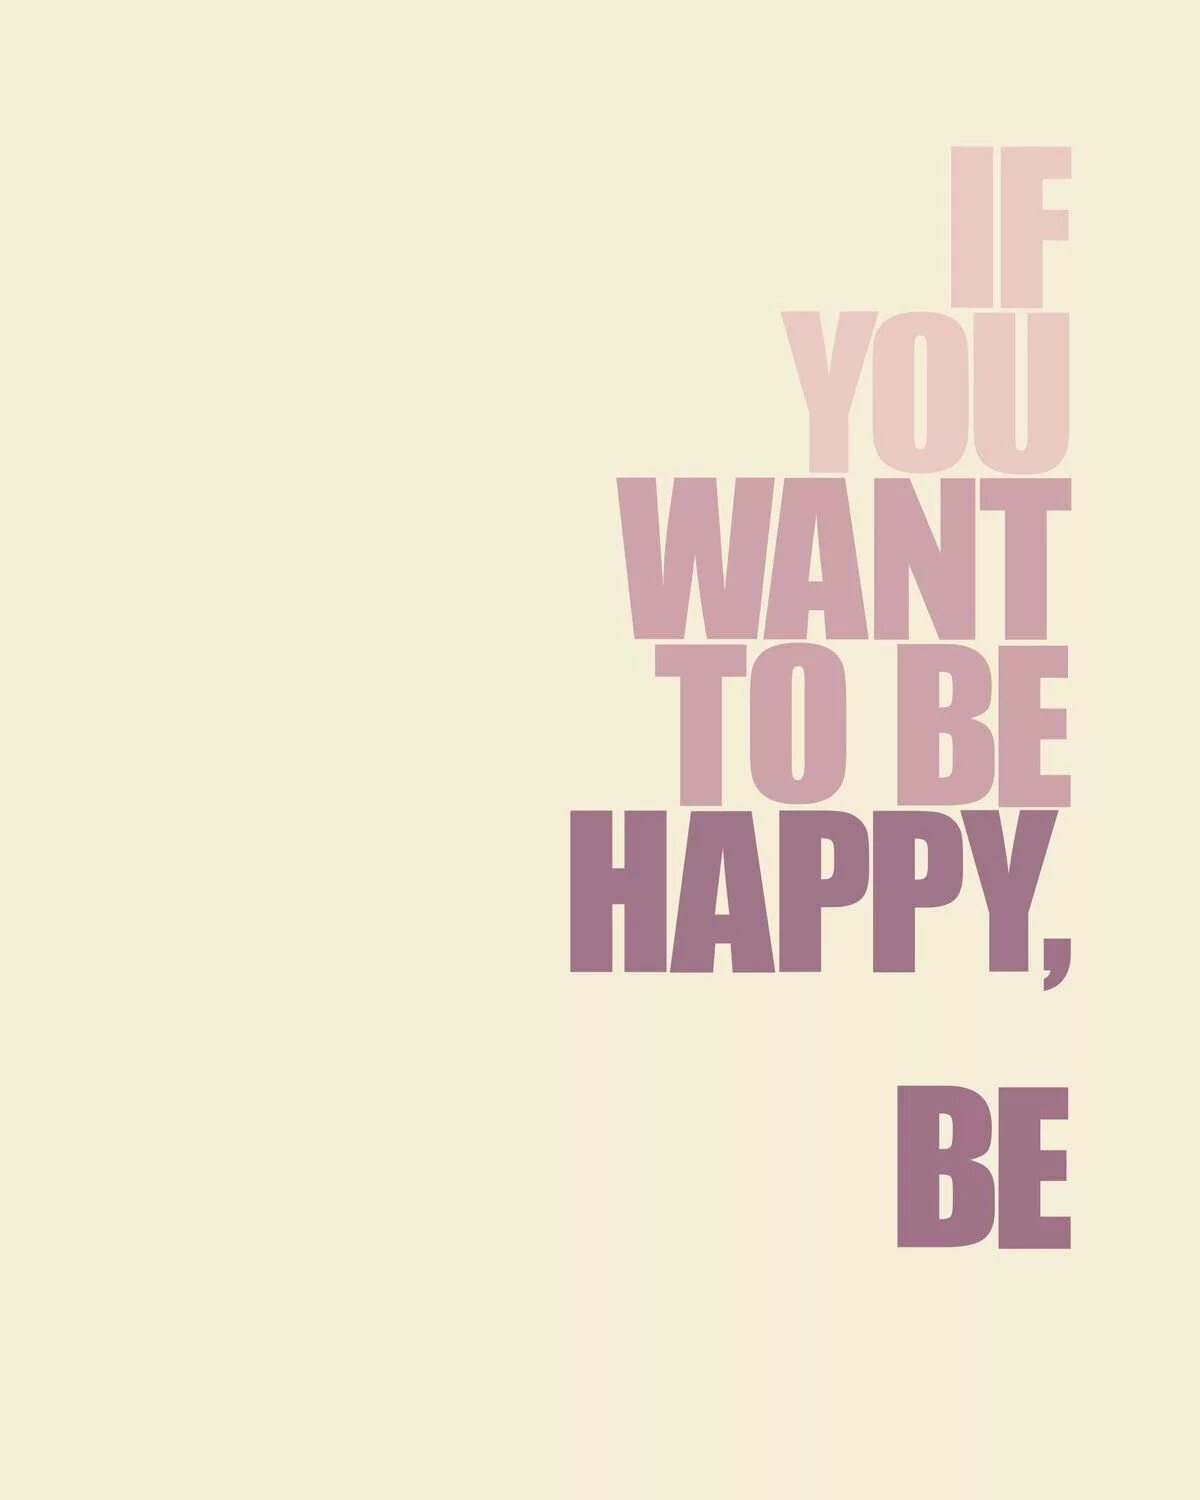 O be happy. If you want to be Happy be. Be Happy. Цитаты be Happy be. I want to be Happy картинки.